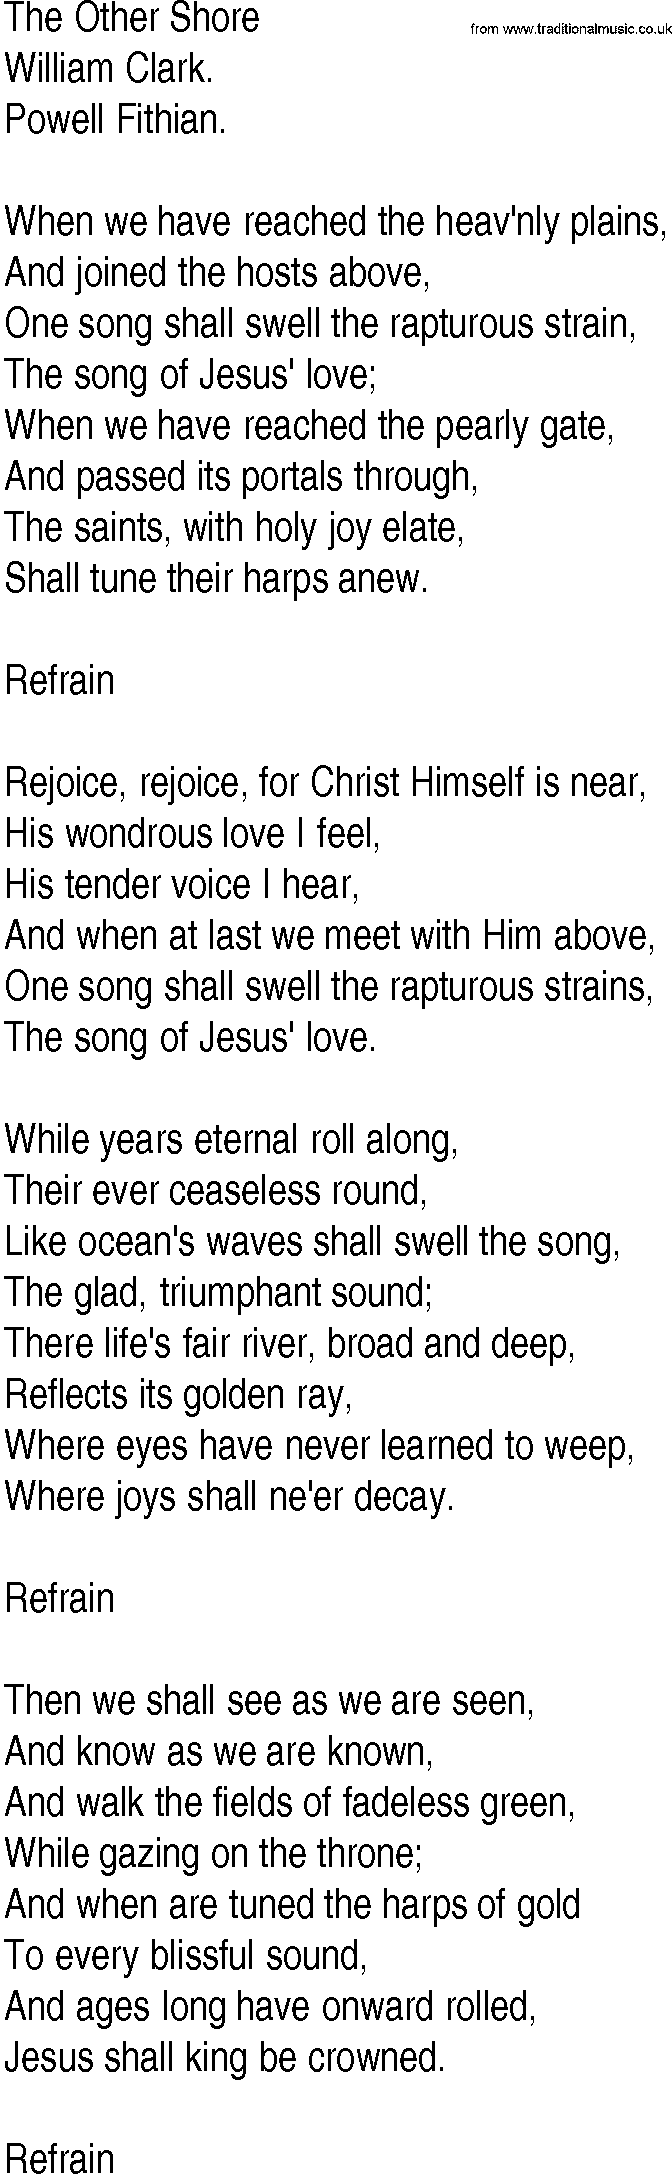 Hymn and Gospel Song: The Other Shore by William Clark lyrics